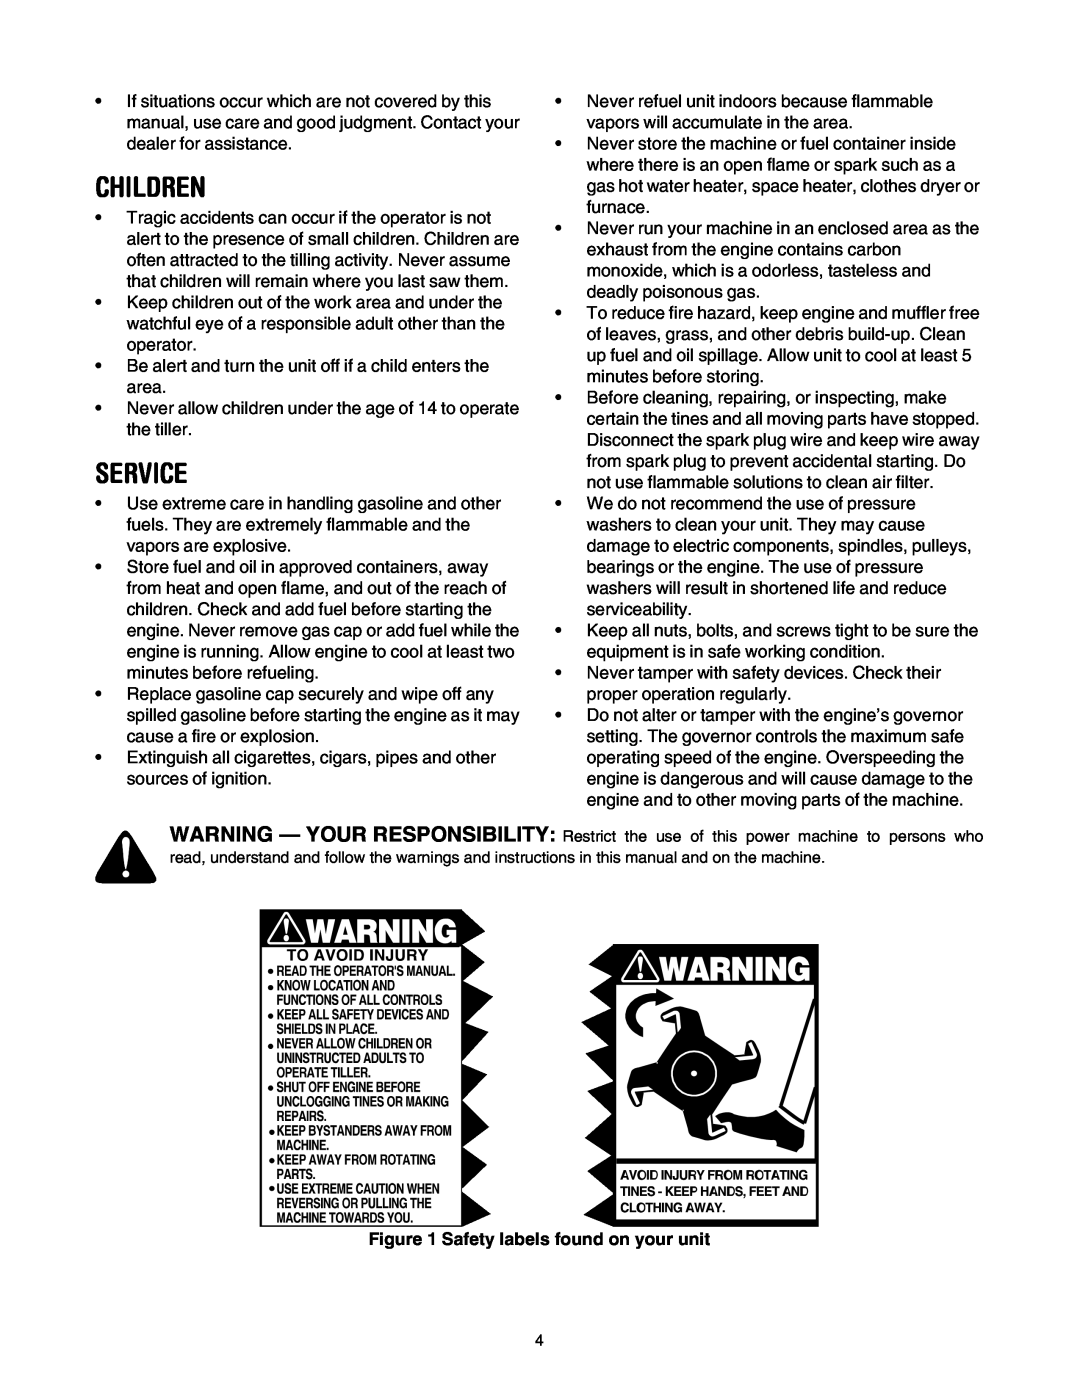 MTD 21A-450 Series manual Children, Service, Safety labels found on your unit 